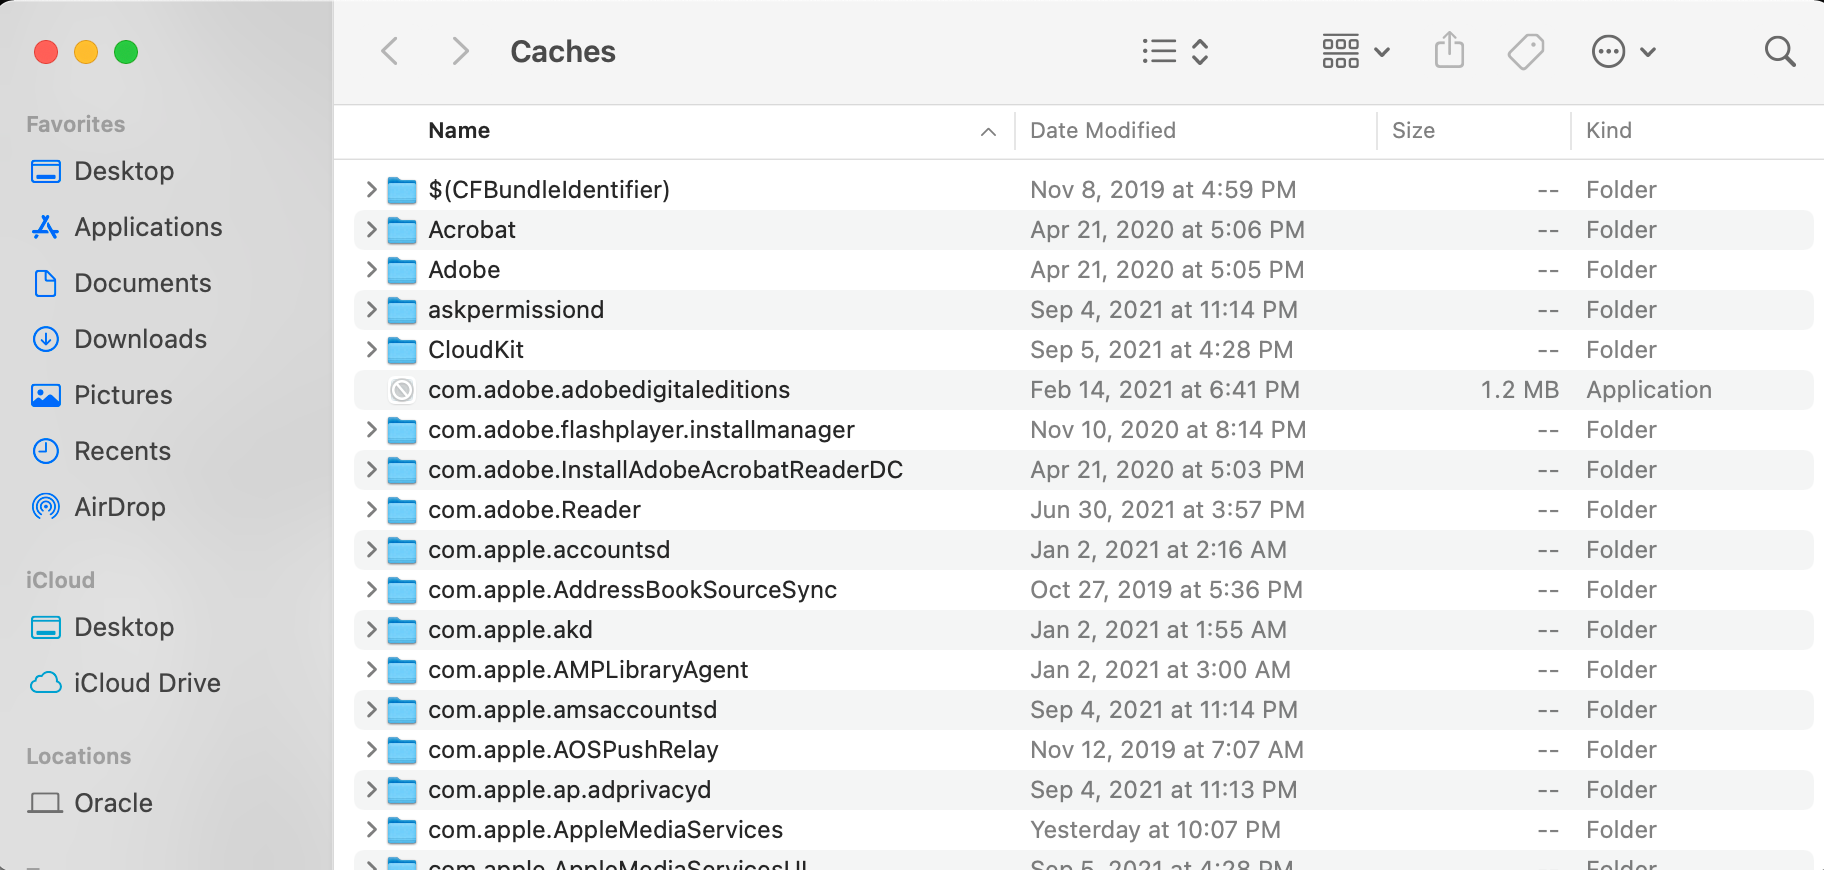 Caches folder open from within the Library on a MacBook Pro